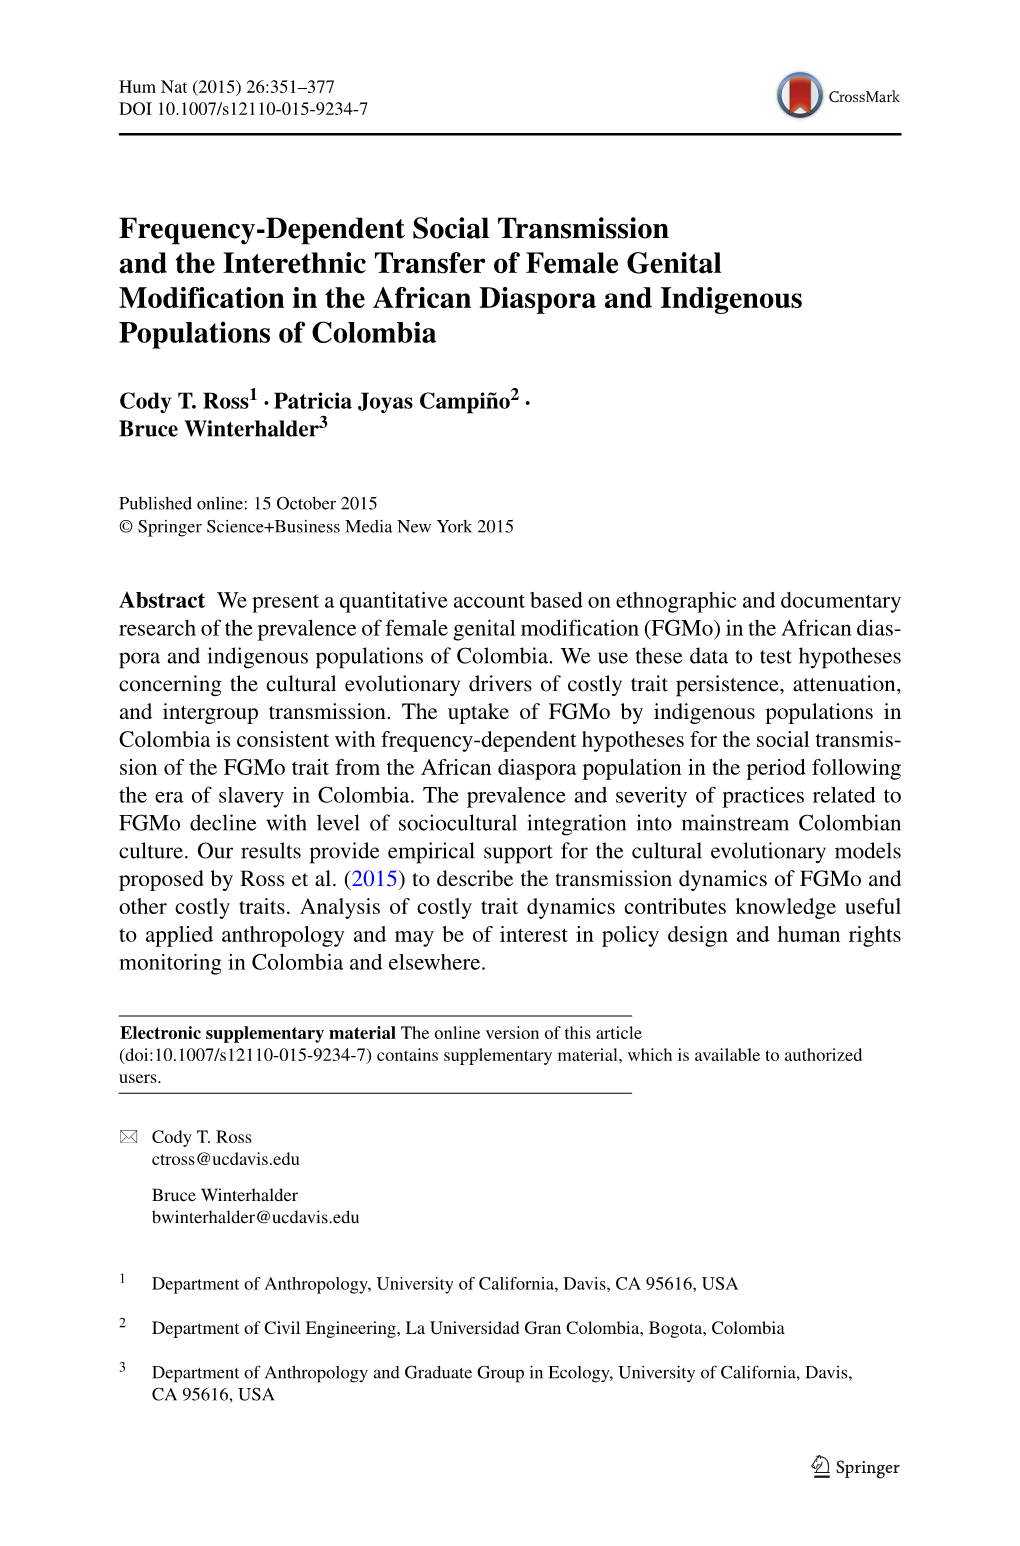 Frequency-Dependent Social Transmission and the Interethnic Transfer of Female Genital Modification in the African Diaspora and Indigenous Populations of Colombia